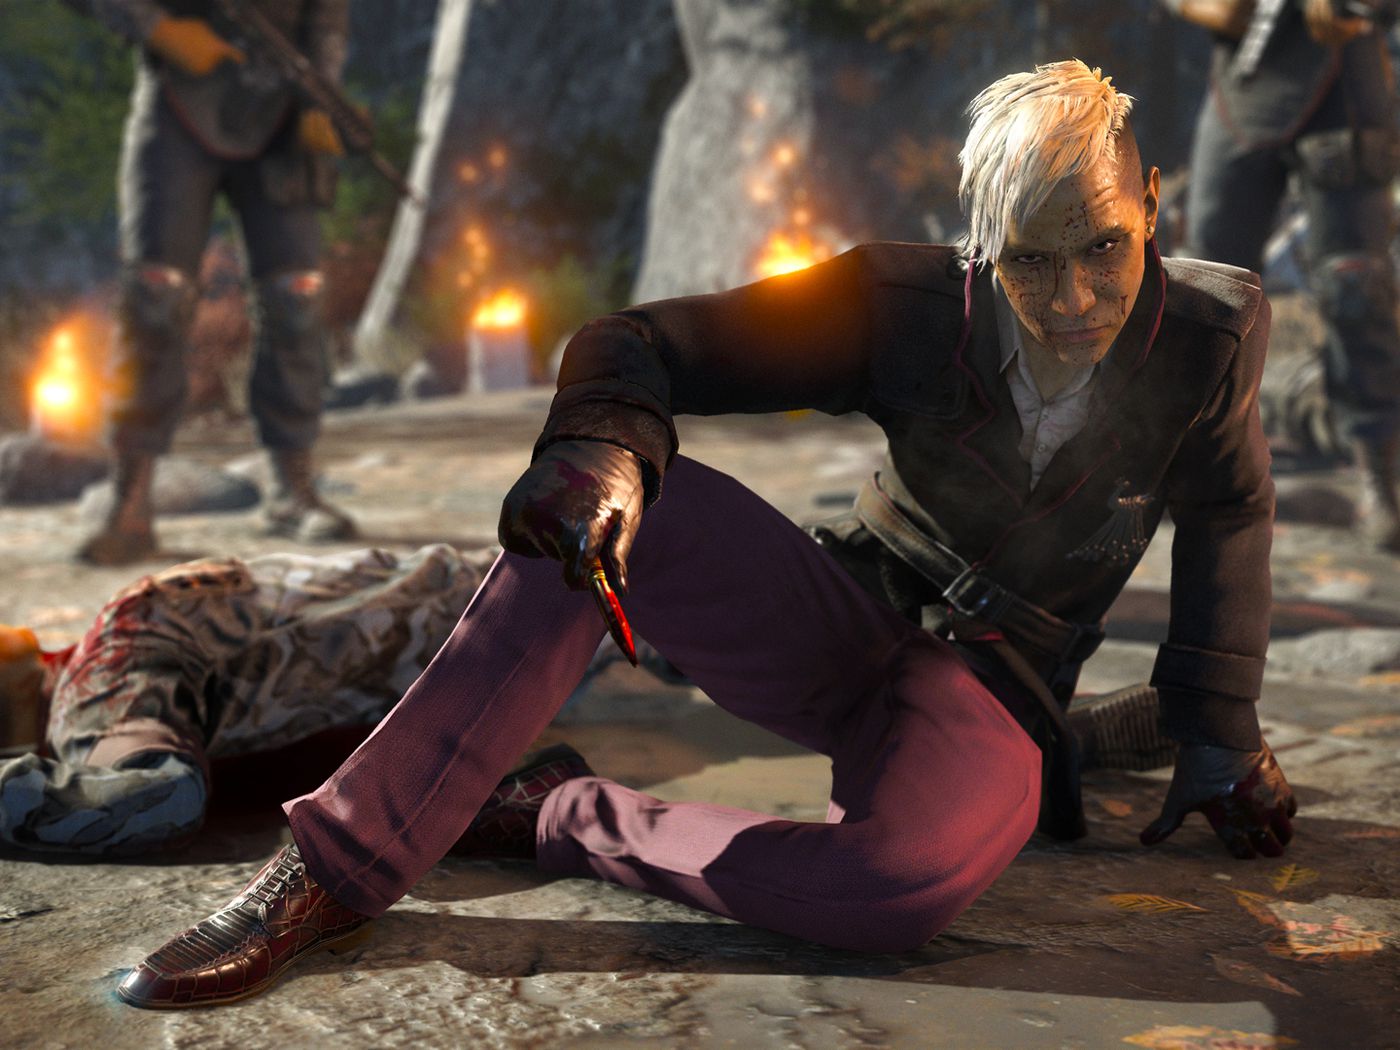 anthony tidd add nudity in far cry 4 photo